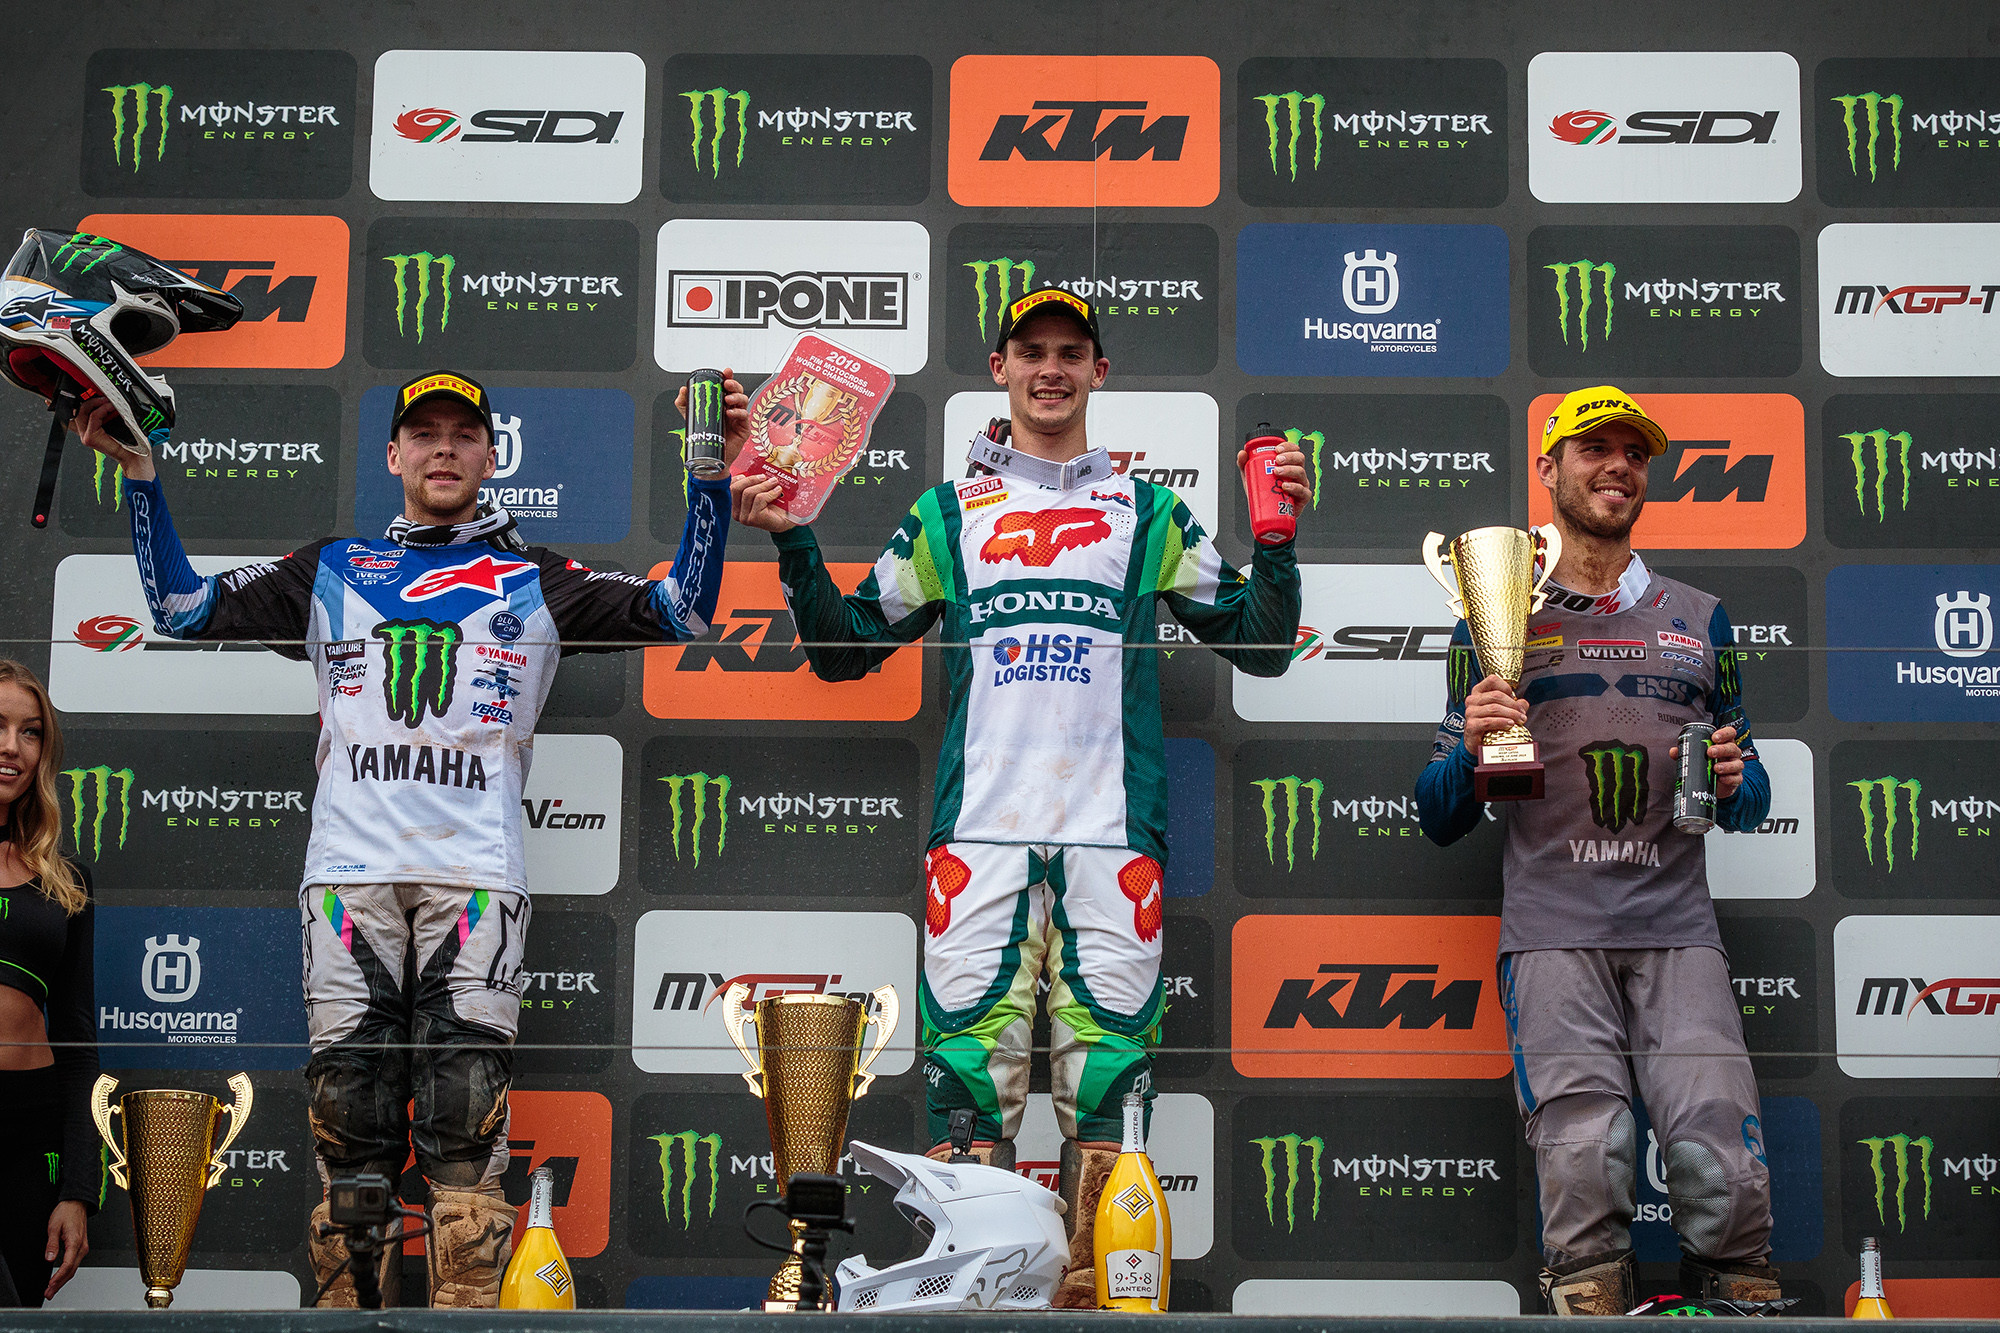 3 Things Observed at the 2019 MXGP of Latvia - Racer X